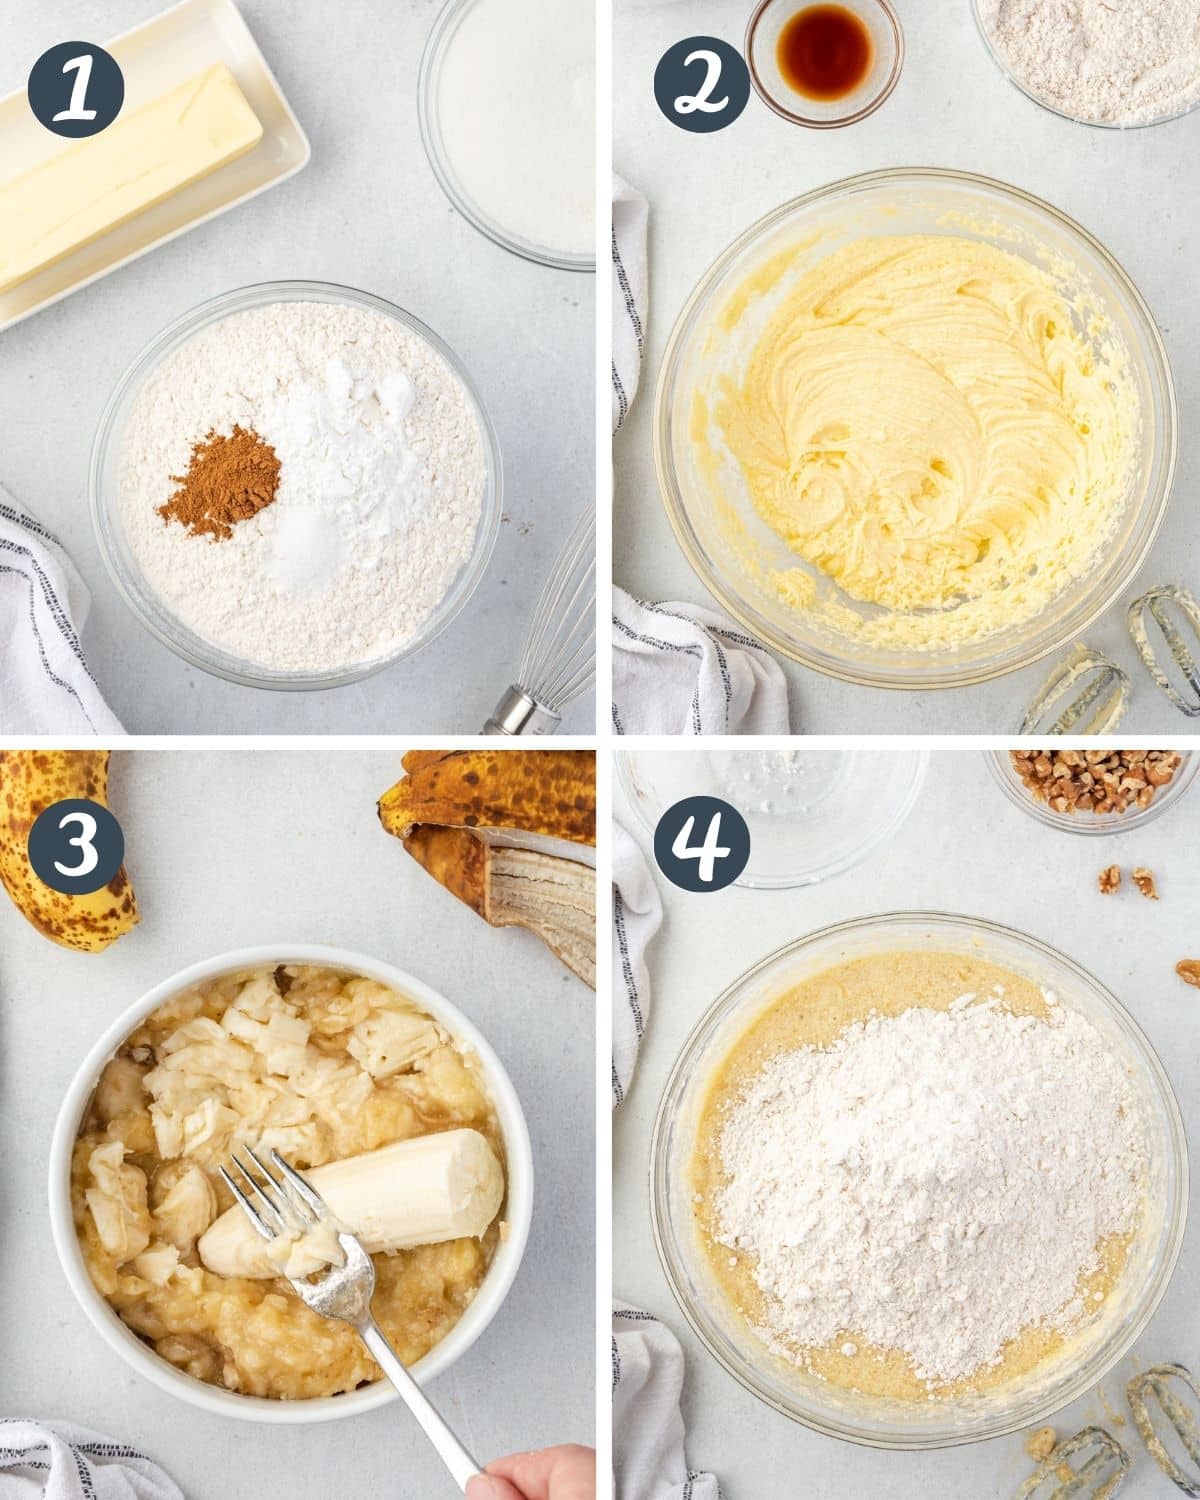 Collage showing 4 steps to make banana bread.